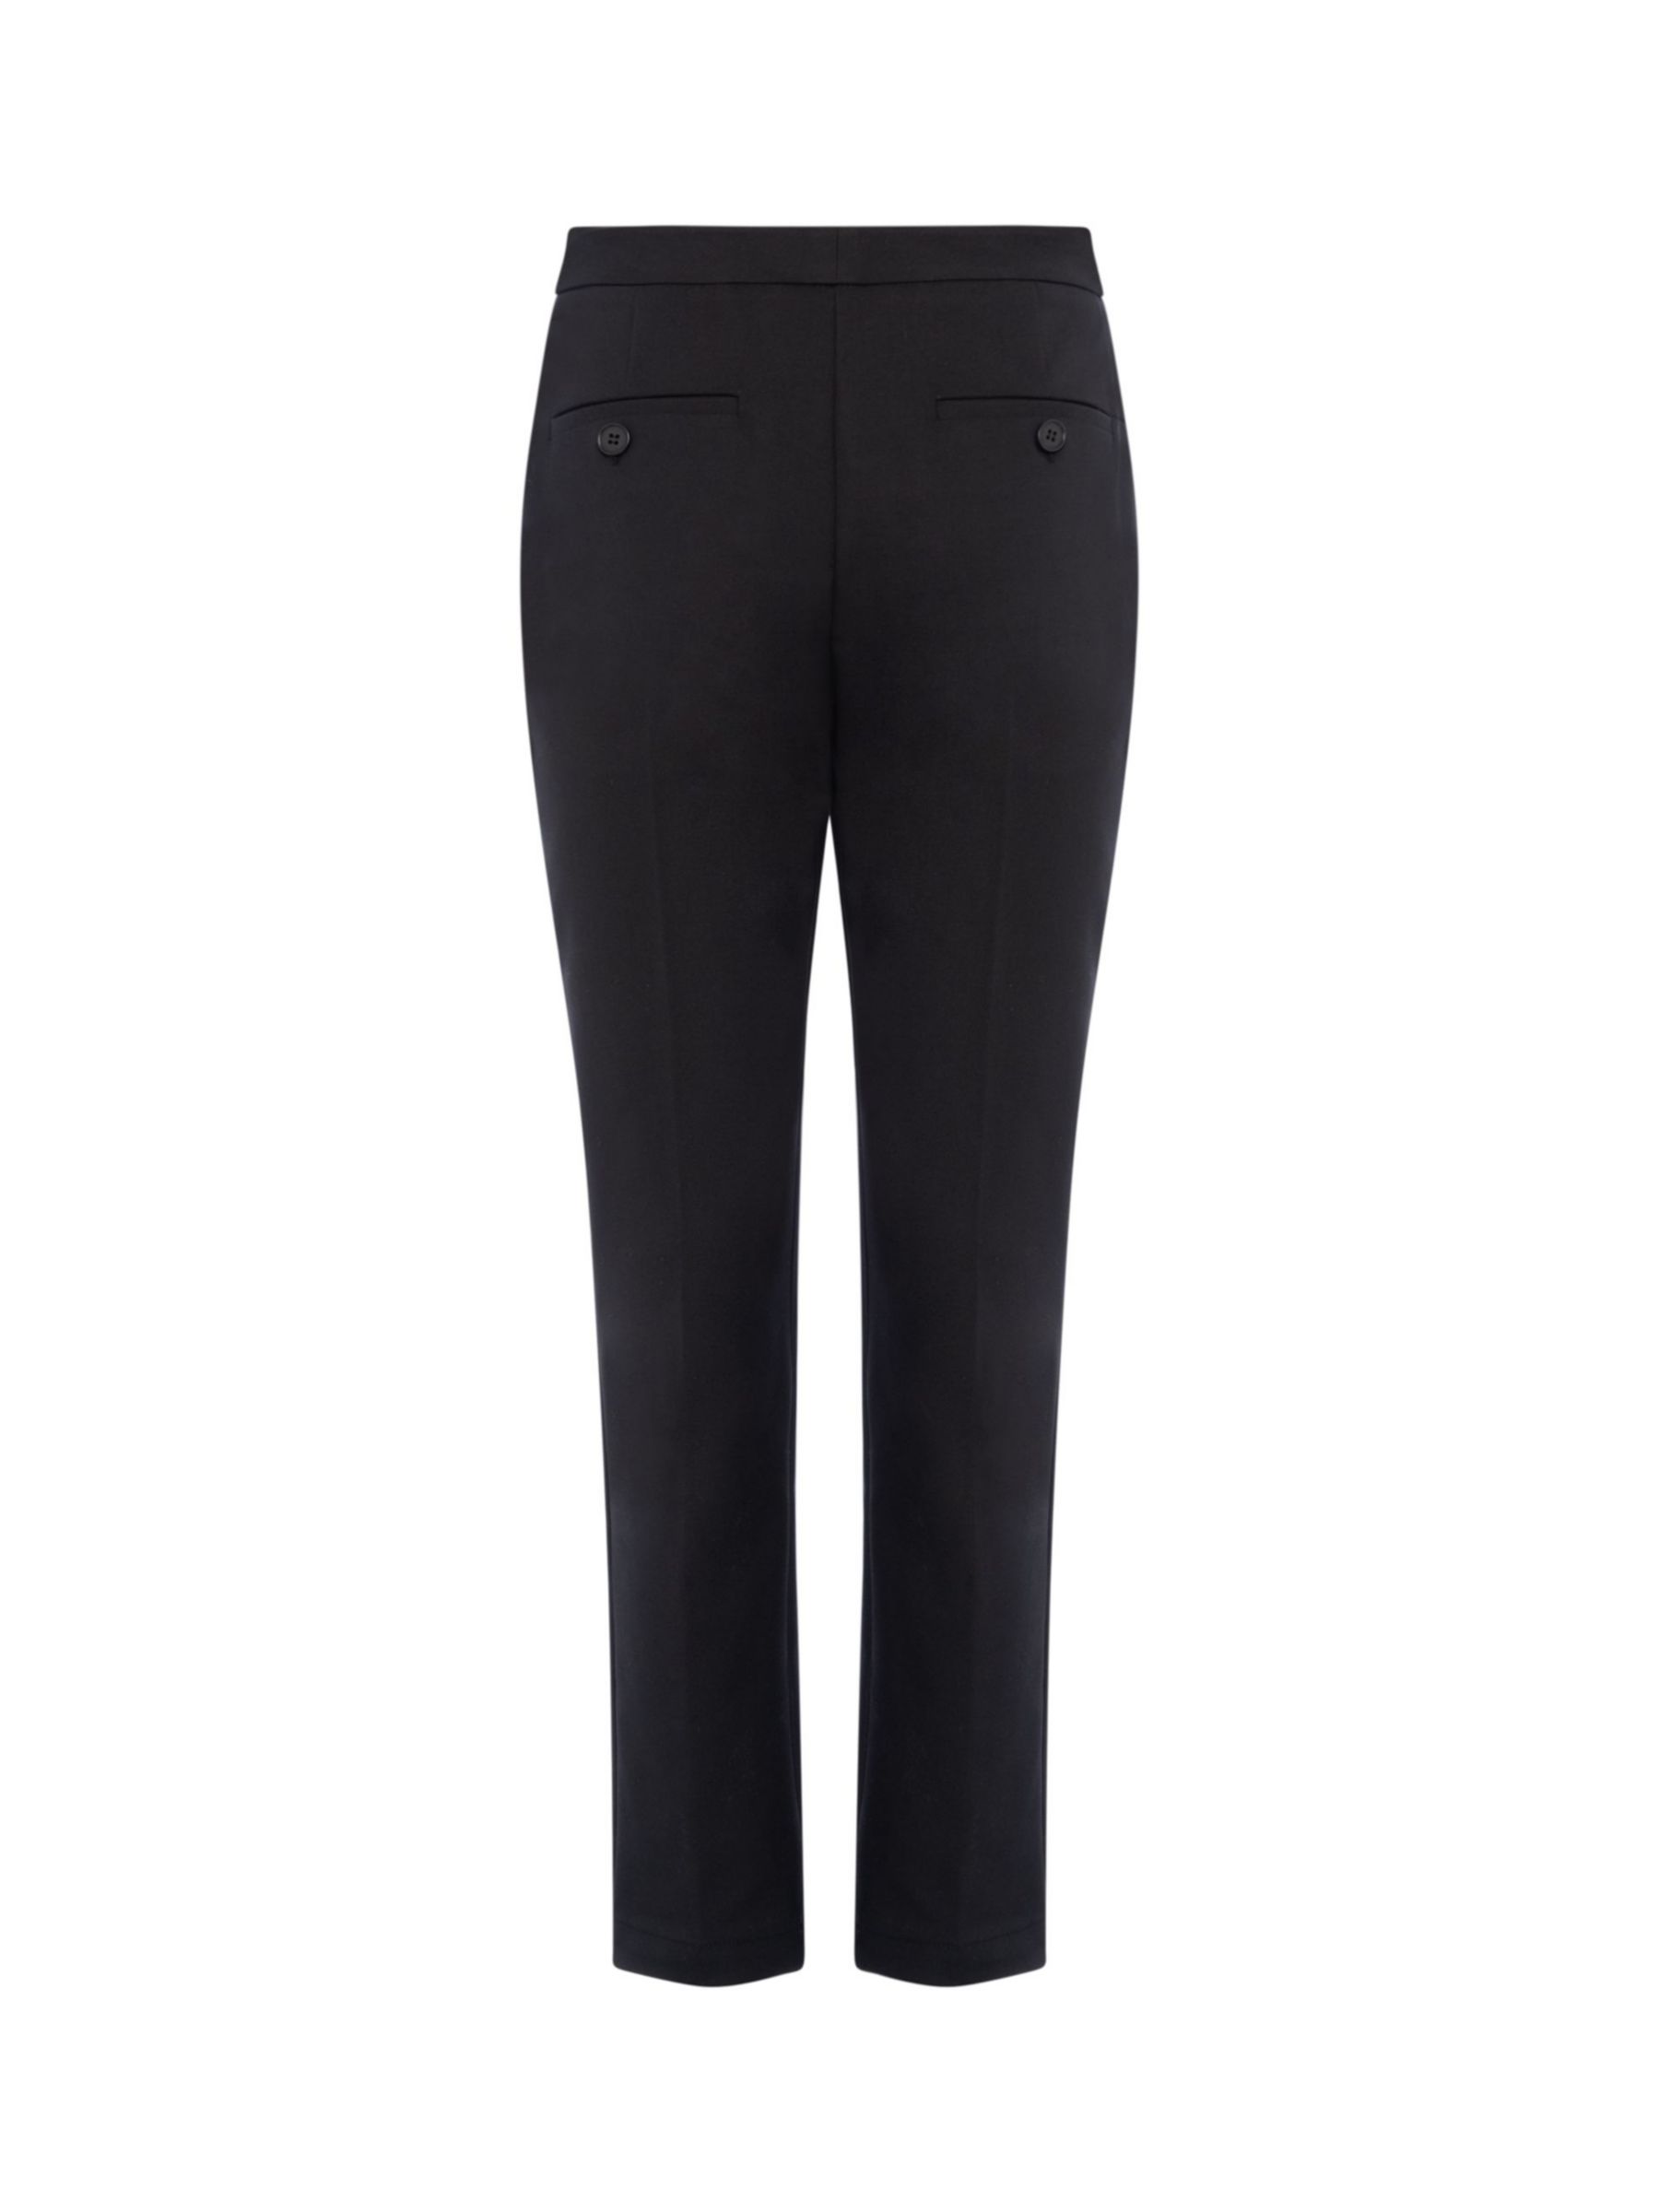 French Connection Fino Glass Stretch Slim Trousers, Black, 6